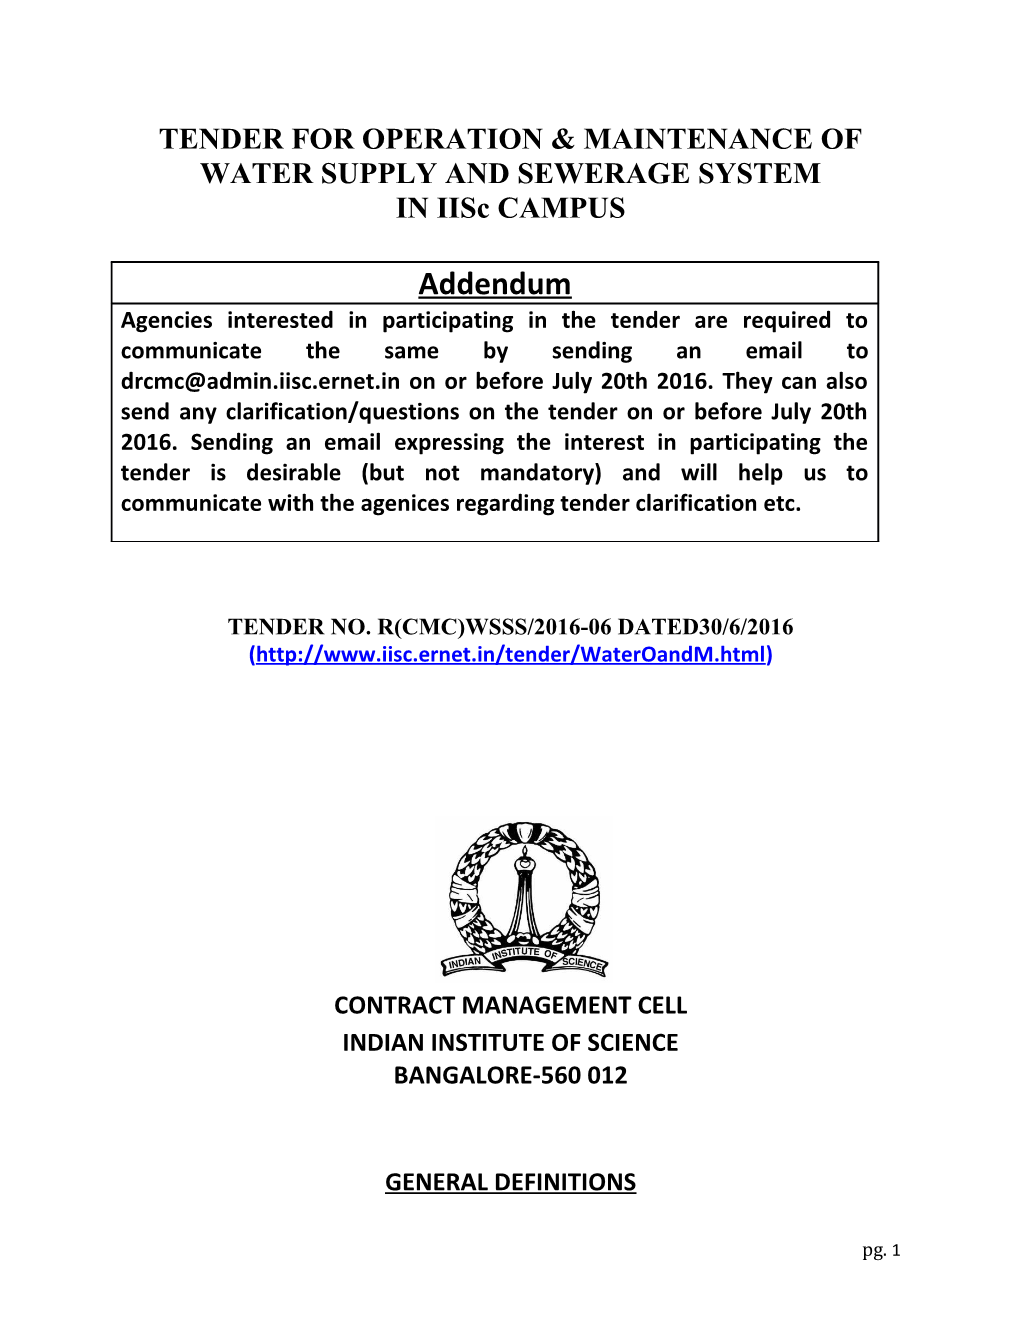 Tender for Operation & Maintenance of Water Supply and Sewerage System